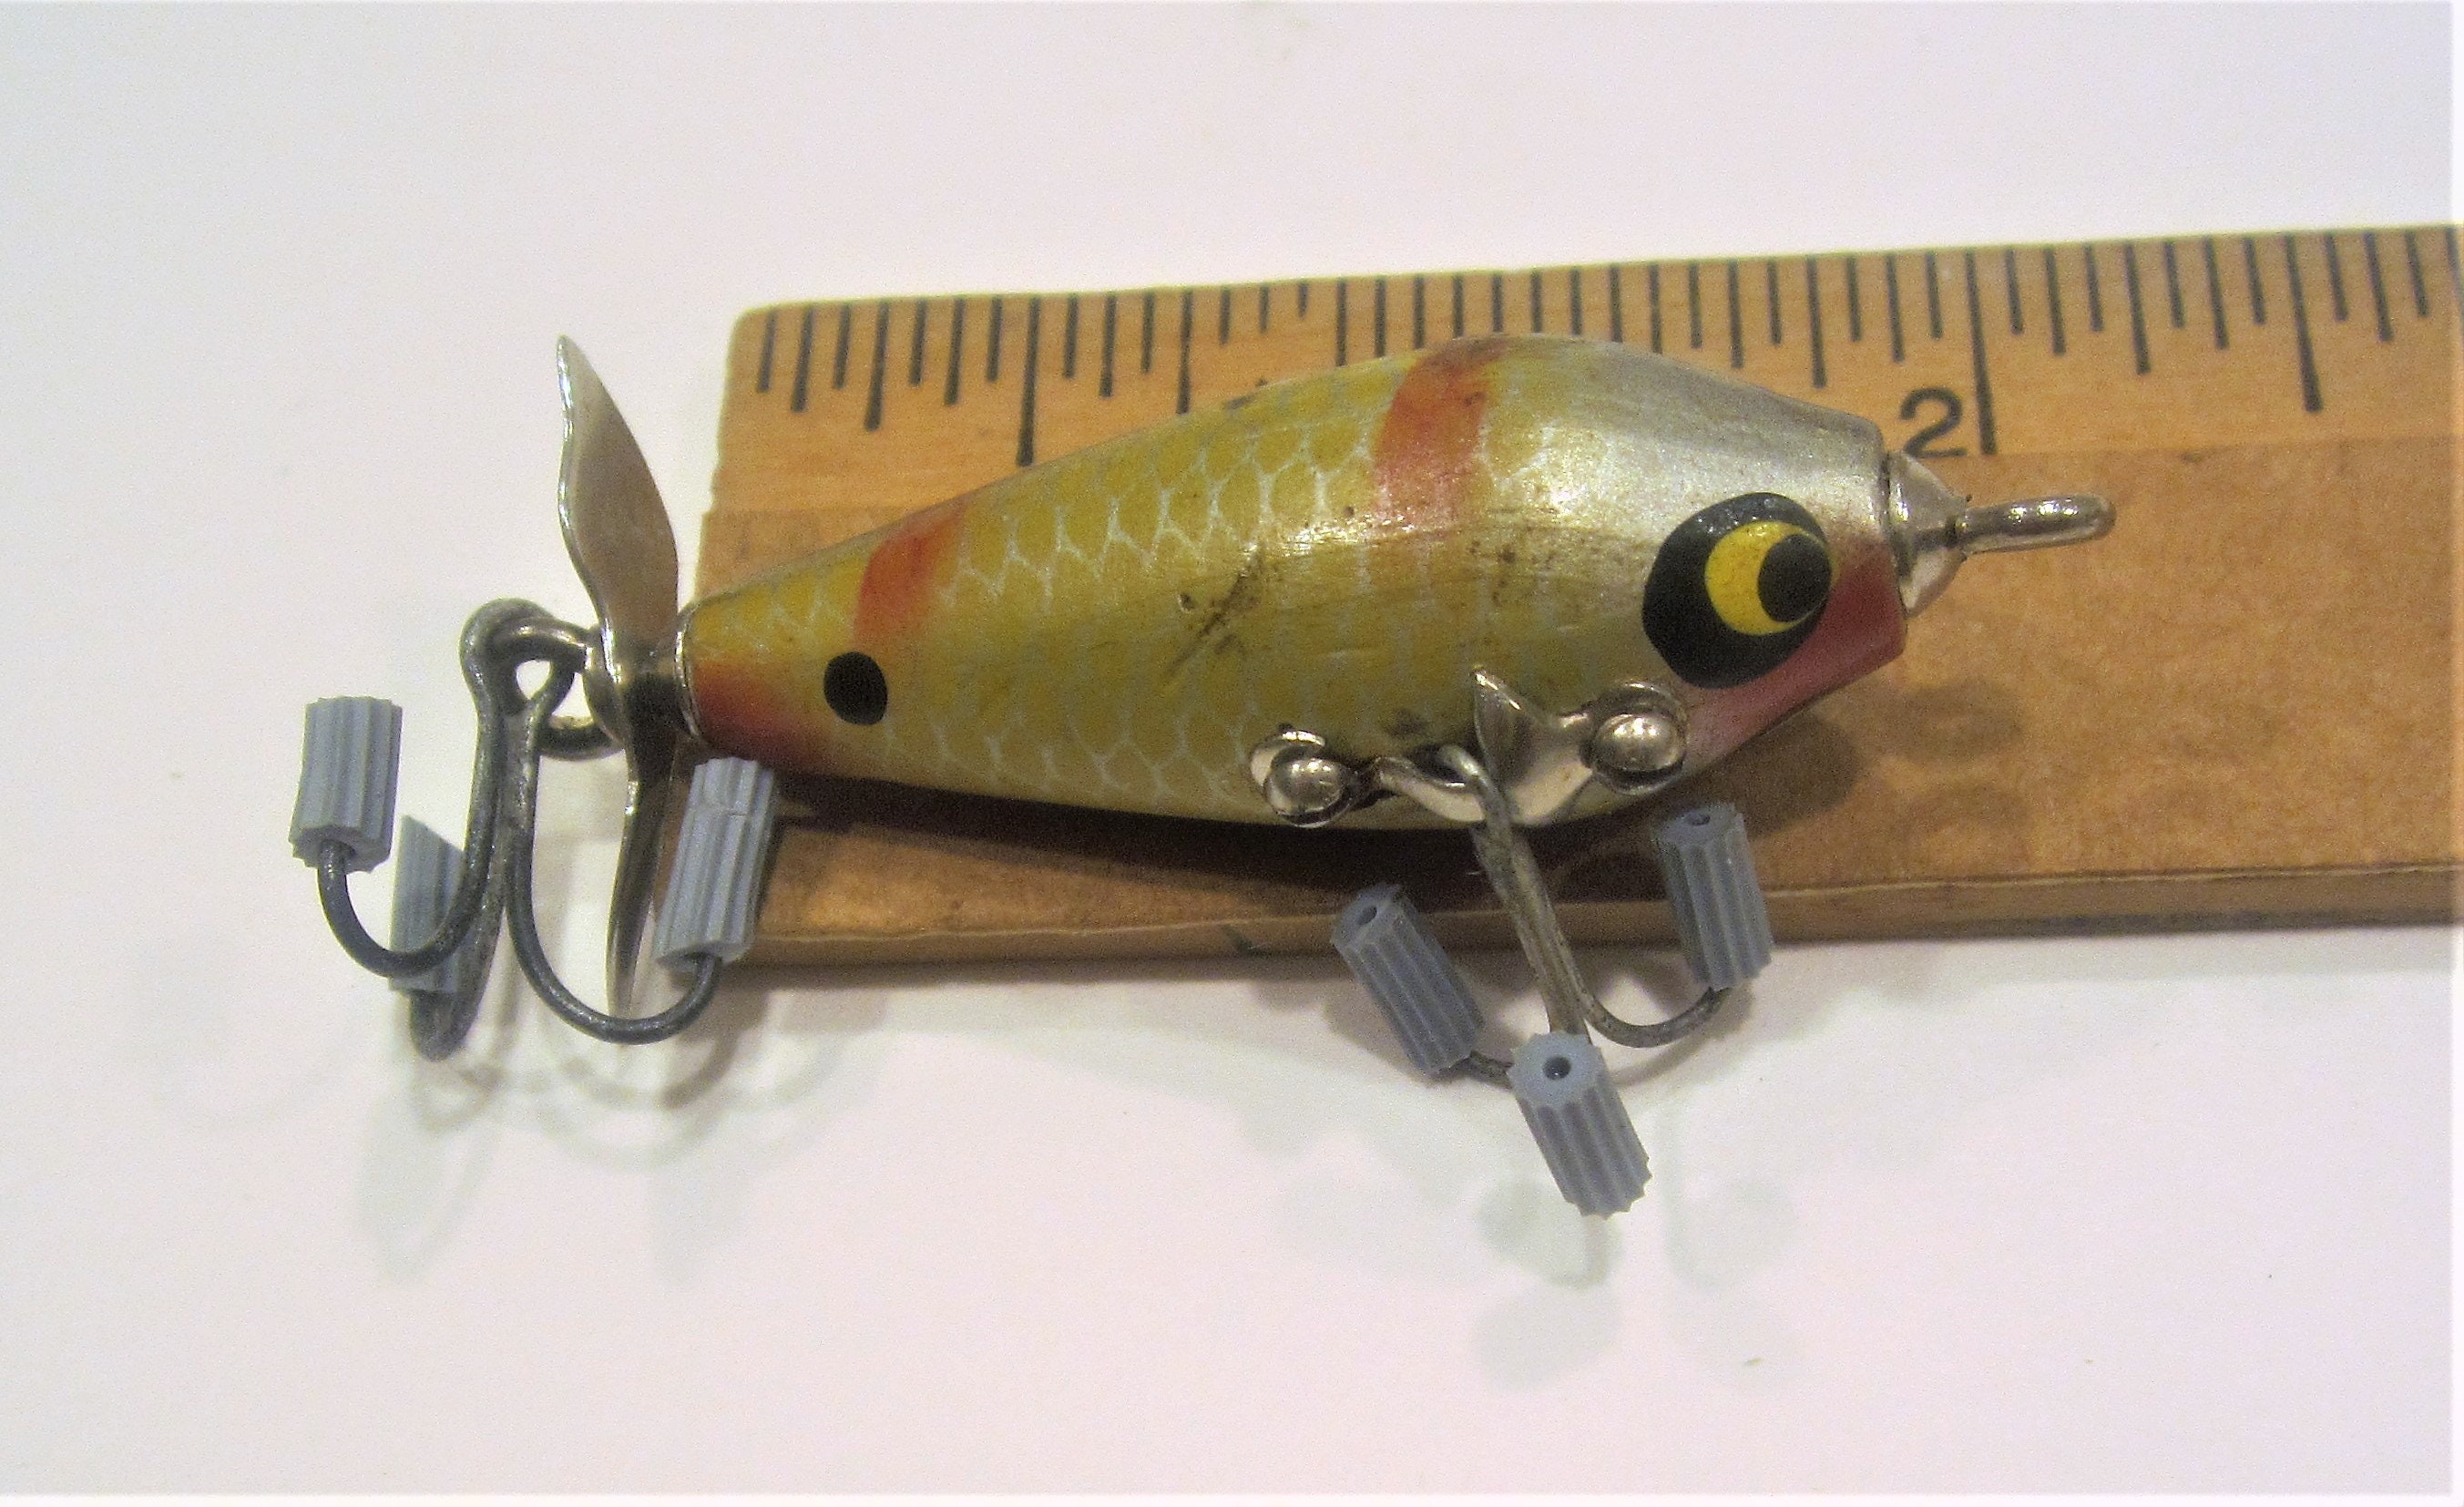 Vintage Fishing Lures / Sold by Numbers / Large Lot of 42 / Most Are Wood  Lures / All Pre Owned / Dating 1940s to 1990s/ Great Gift Item 